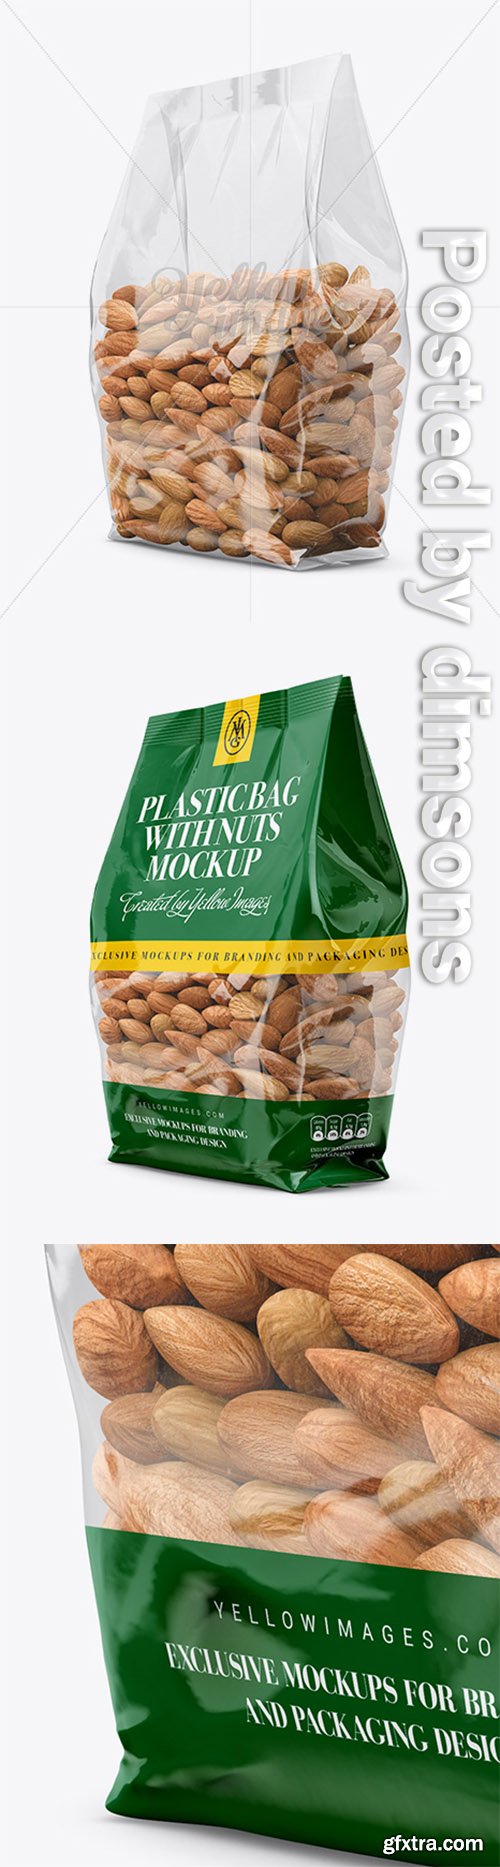 Clear Bag With Almonds Mockup - Halfside View 14583